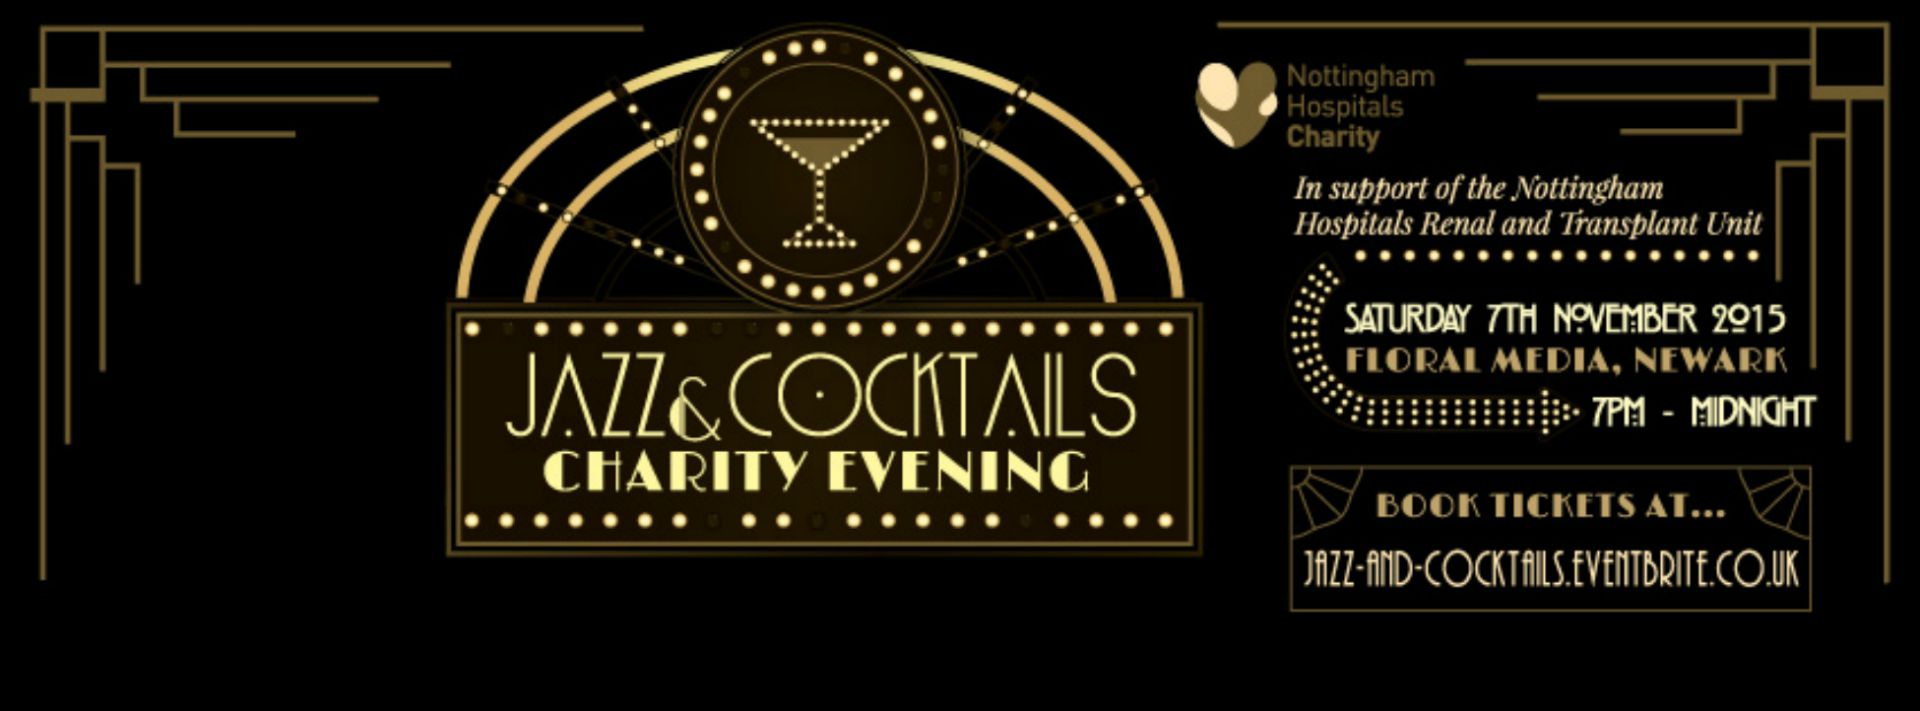 Jazz and Cocktails - Charity dinner at Floral Media